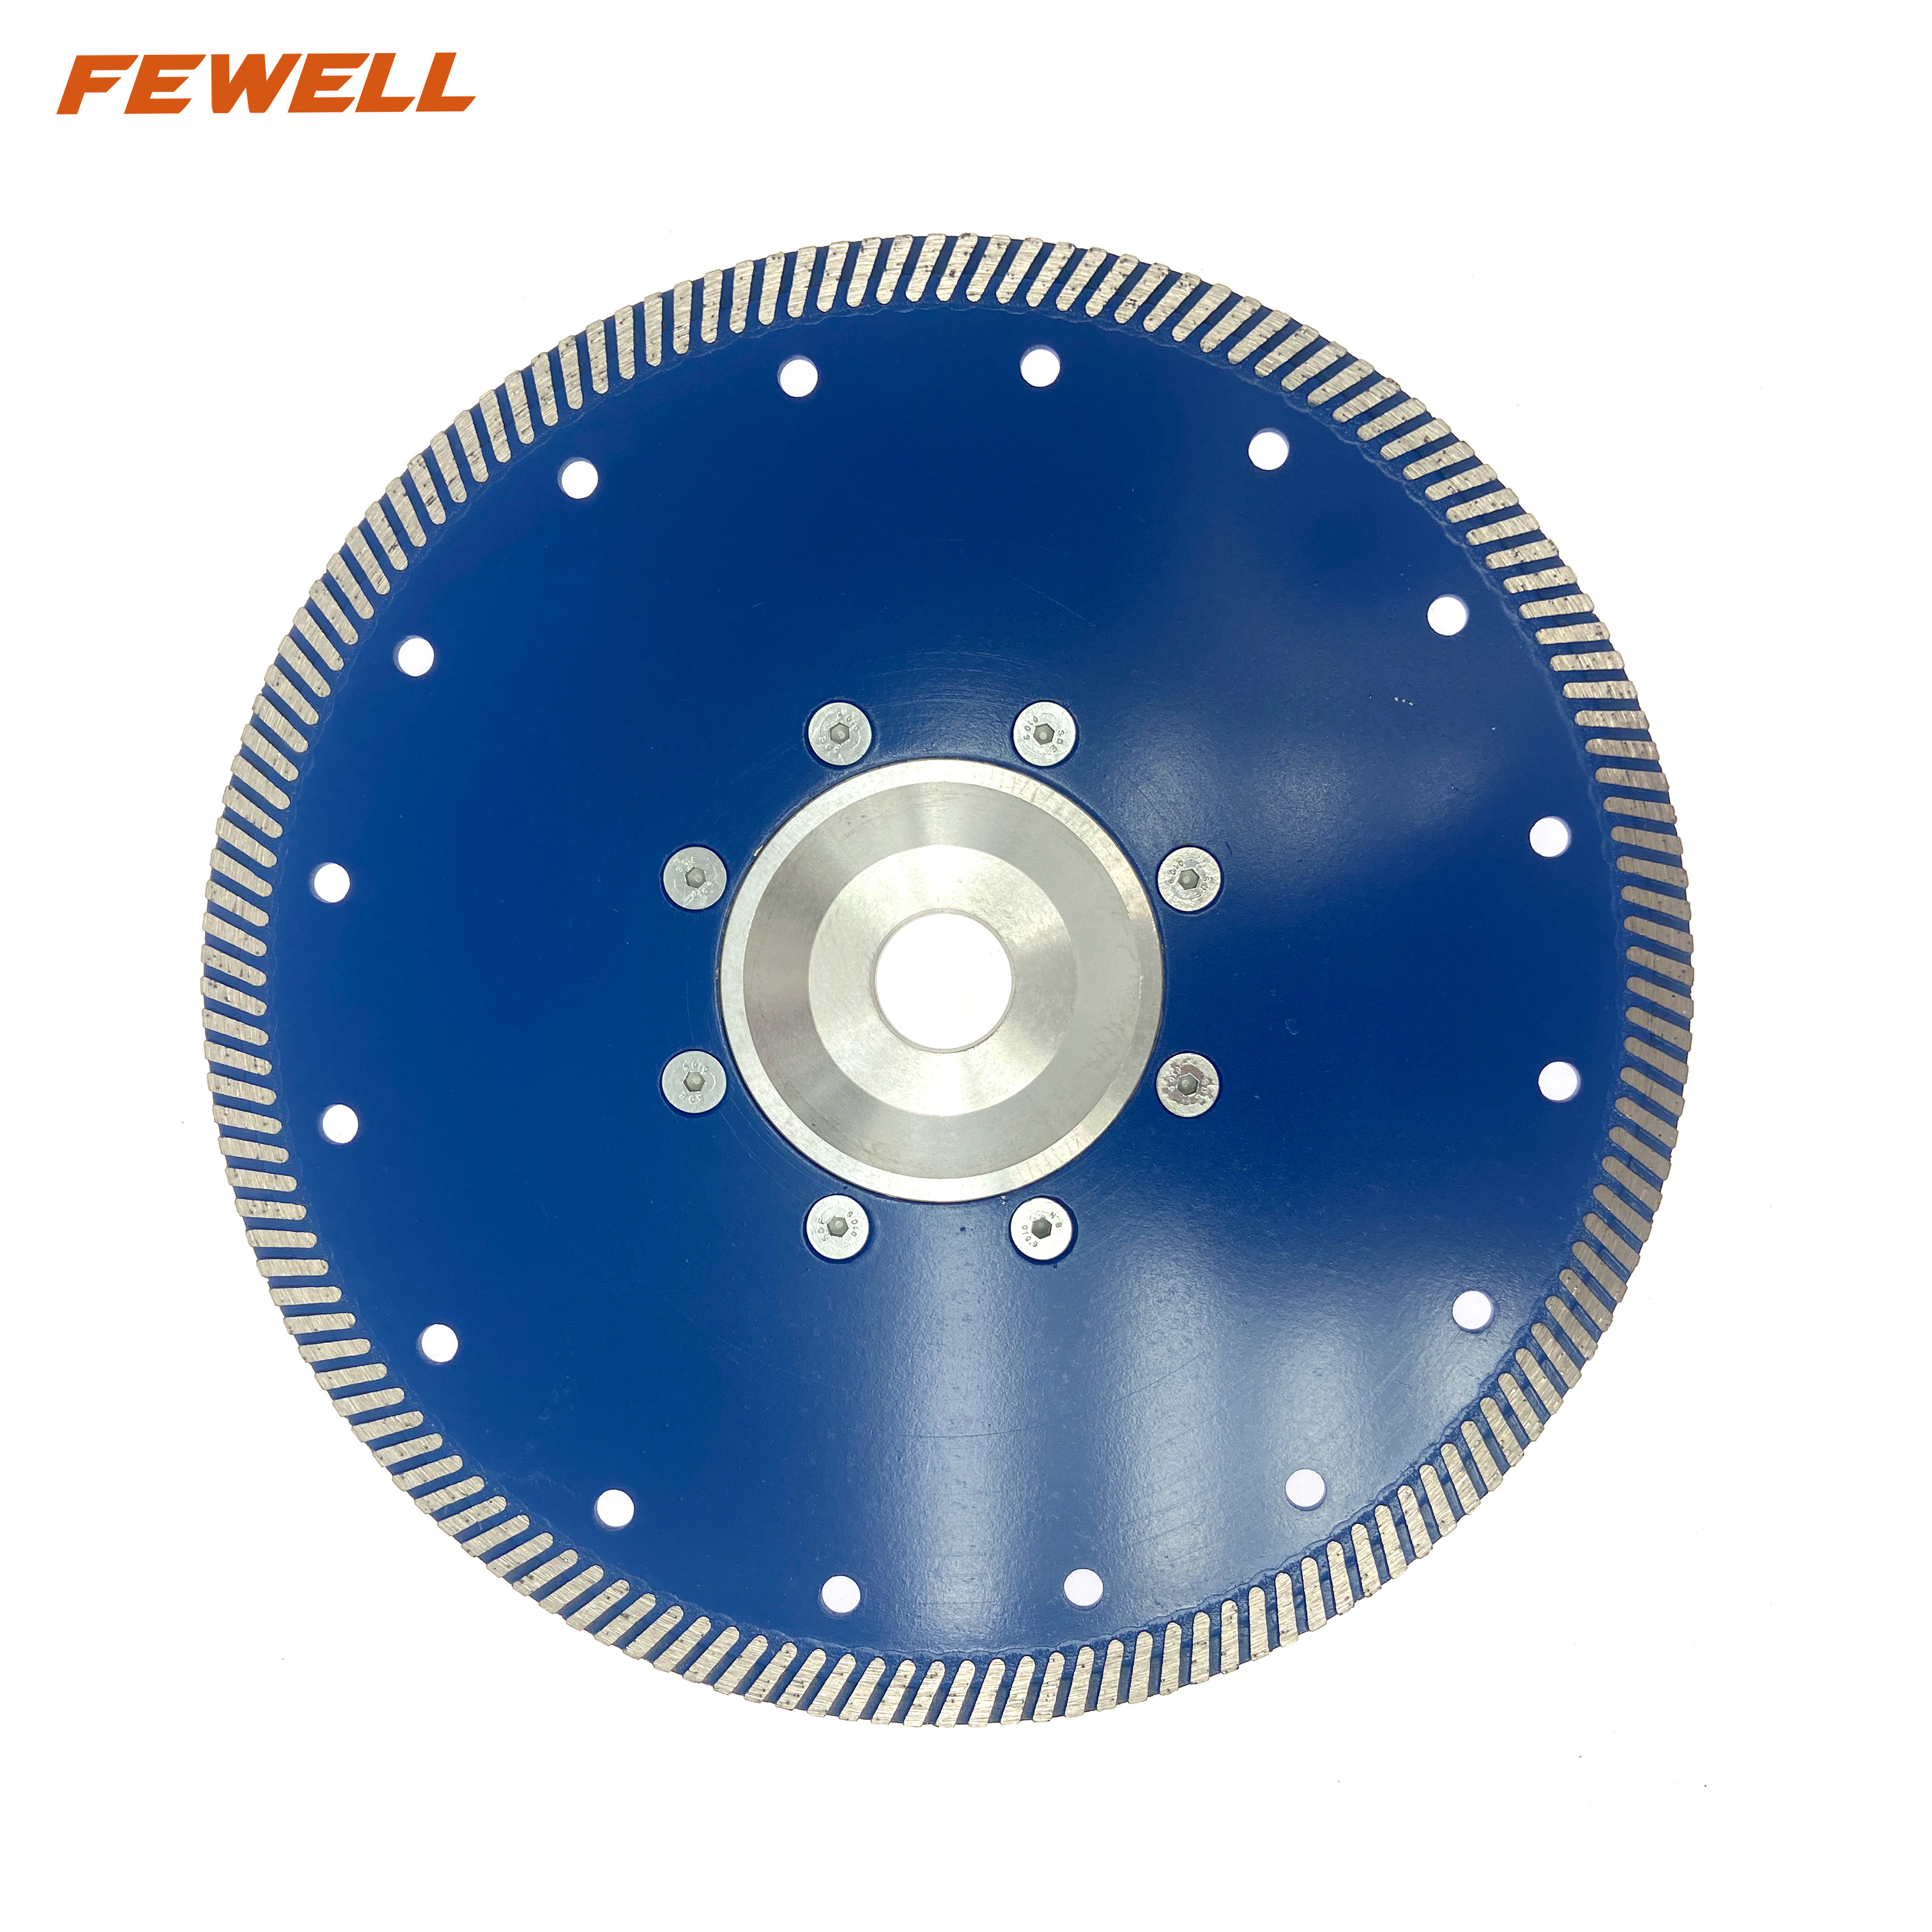 High quality Hot Press 9inch 230*2.6*10*70mm with 22.23mm aluminum flange center diamond turbo saw blade for cutting granite